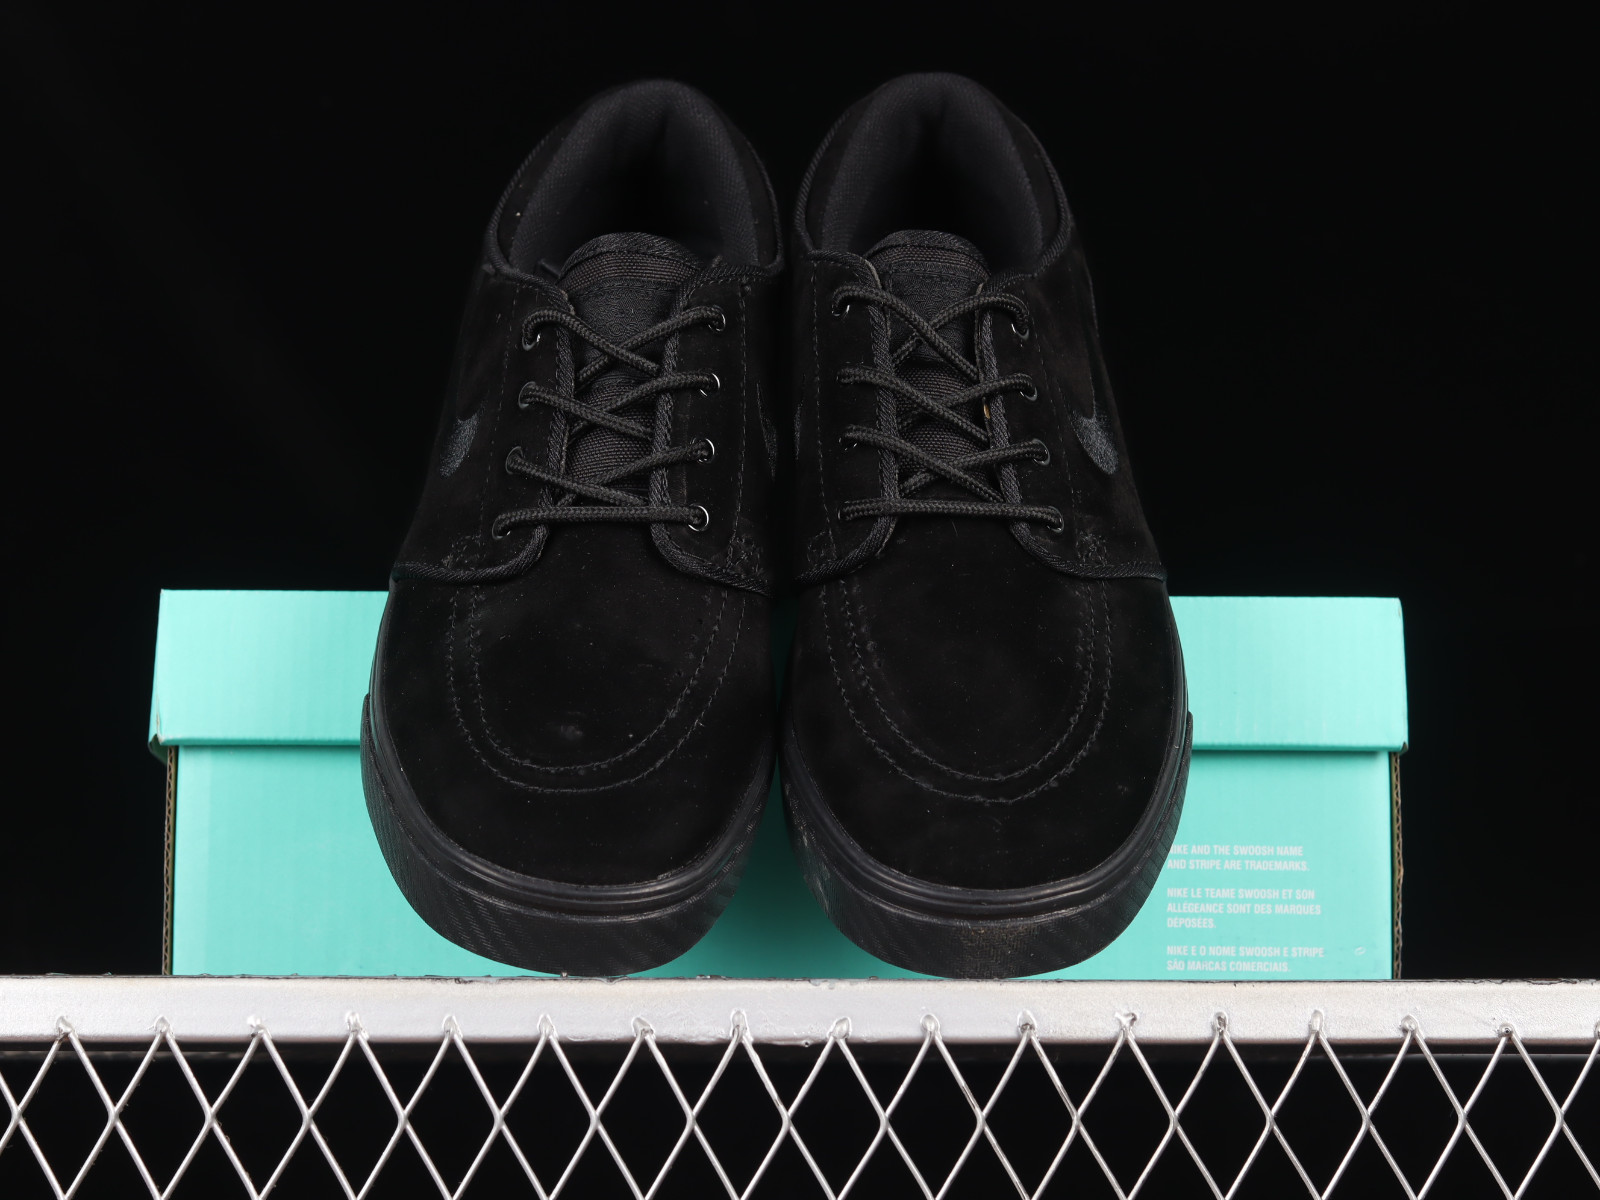 SB Zoom Stefan Janoski Black 633014 - Nikes Air Force Vandalized Arrives A Combo Of Sail - 001 - MultiscaleconsultingShops